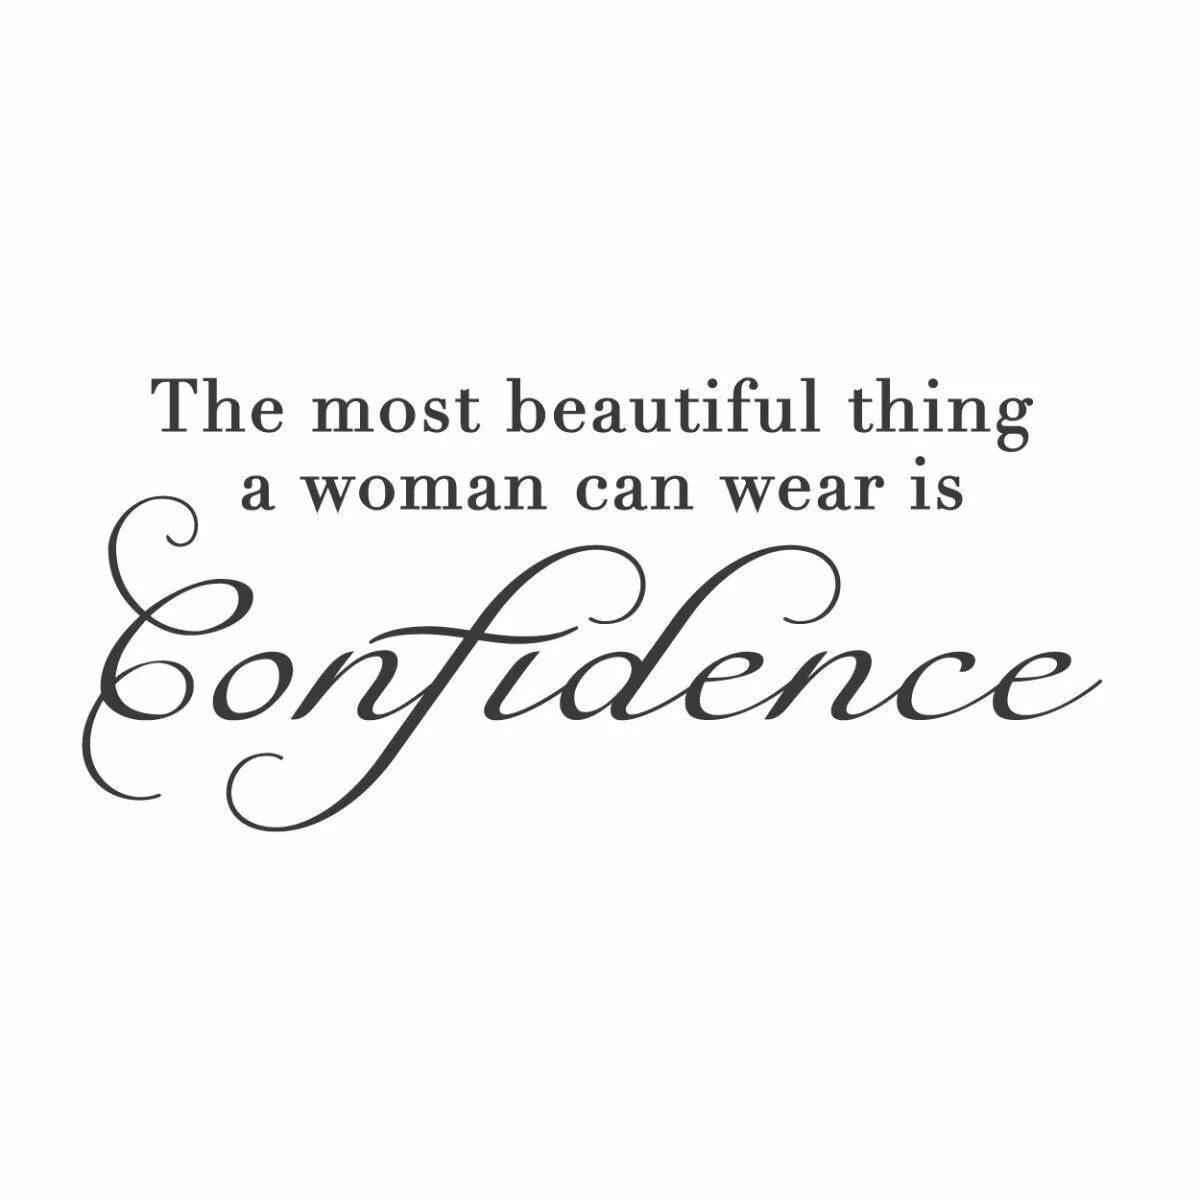 Do beautiful thing. Woman quotes. Картинки do beautiful things. The most popular quotes. Independent woman.